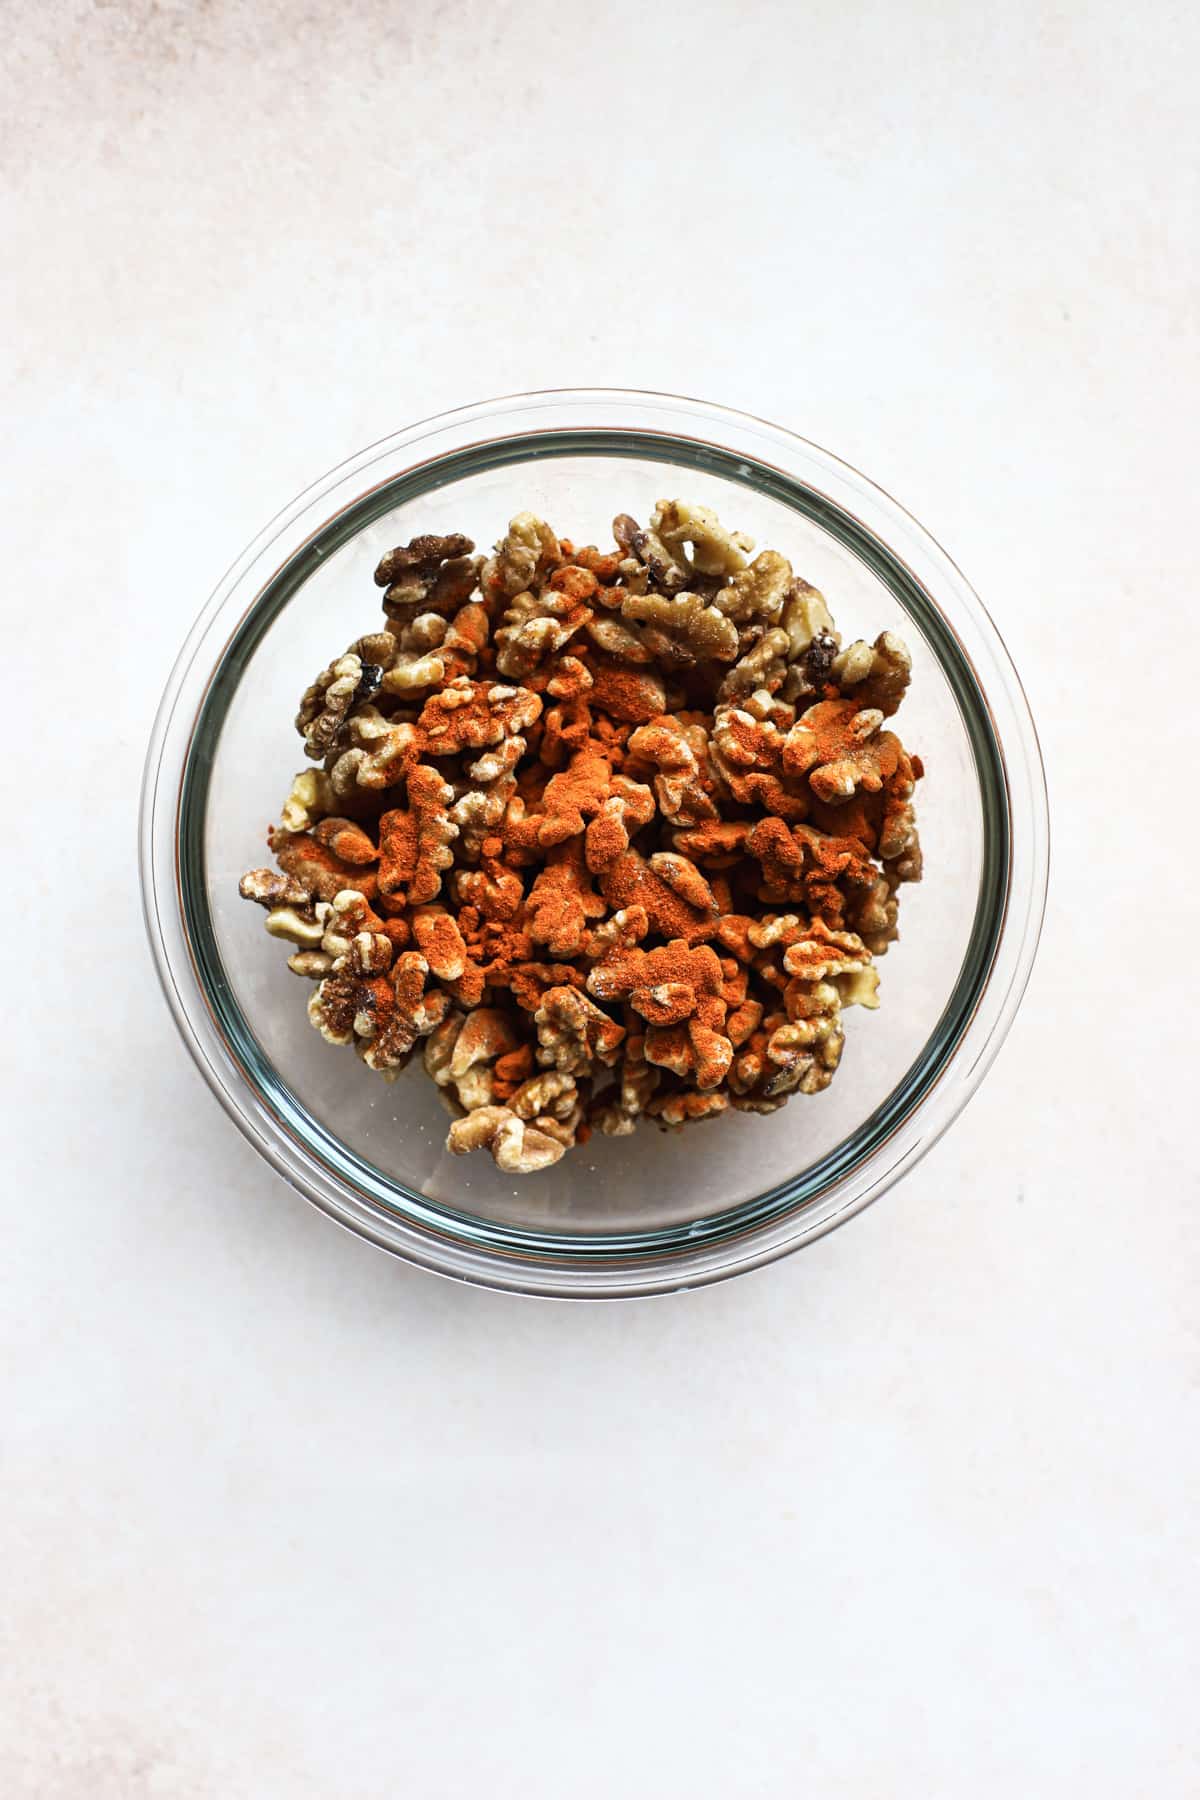 Walnuts, cayenne, and salt tossed together in clear glass bowl